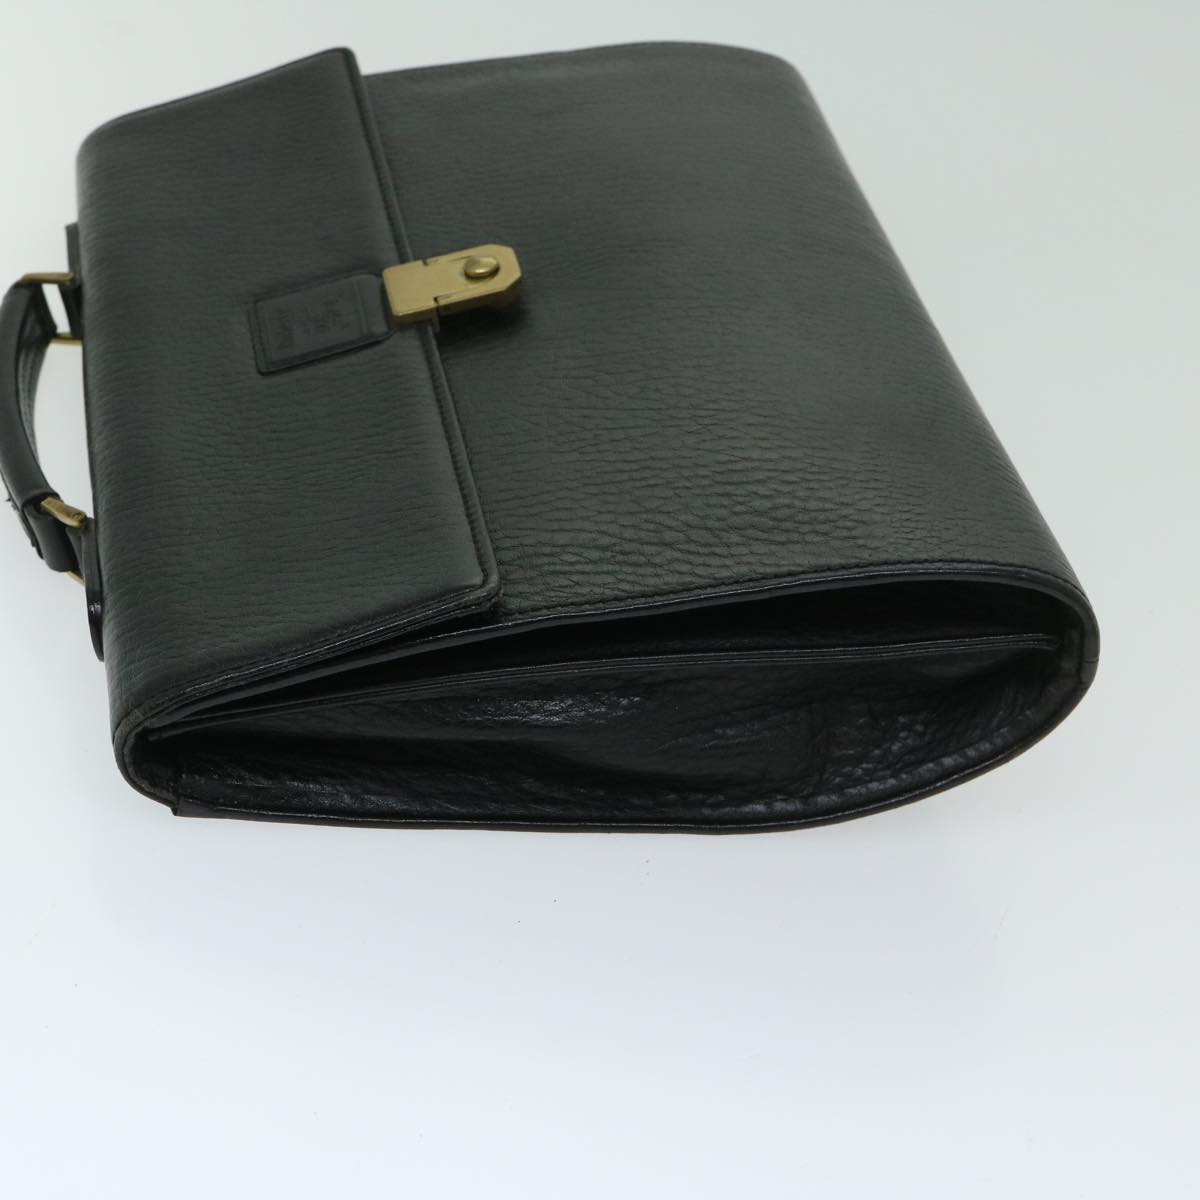 Burberrys Business Bag Leather Black Auth bs11219